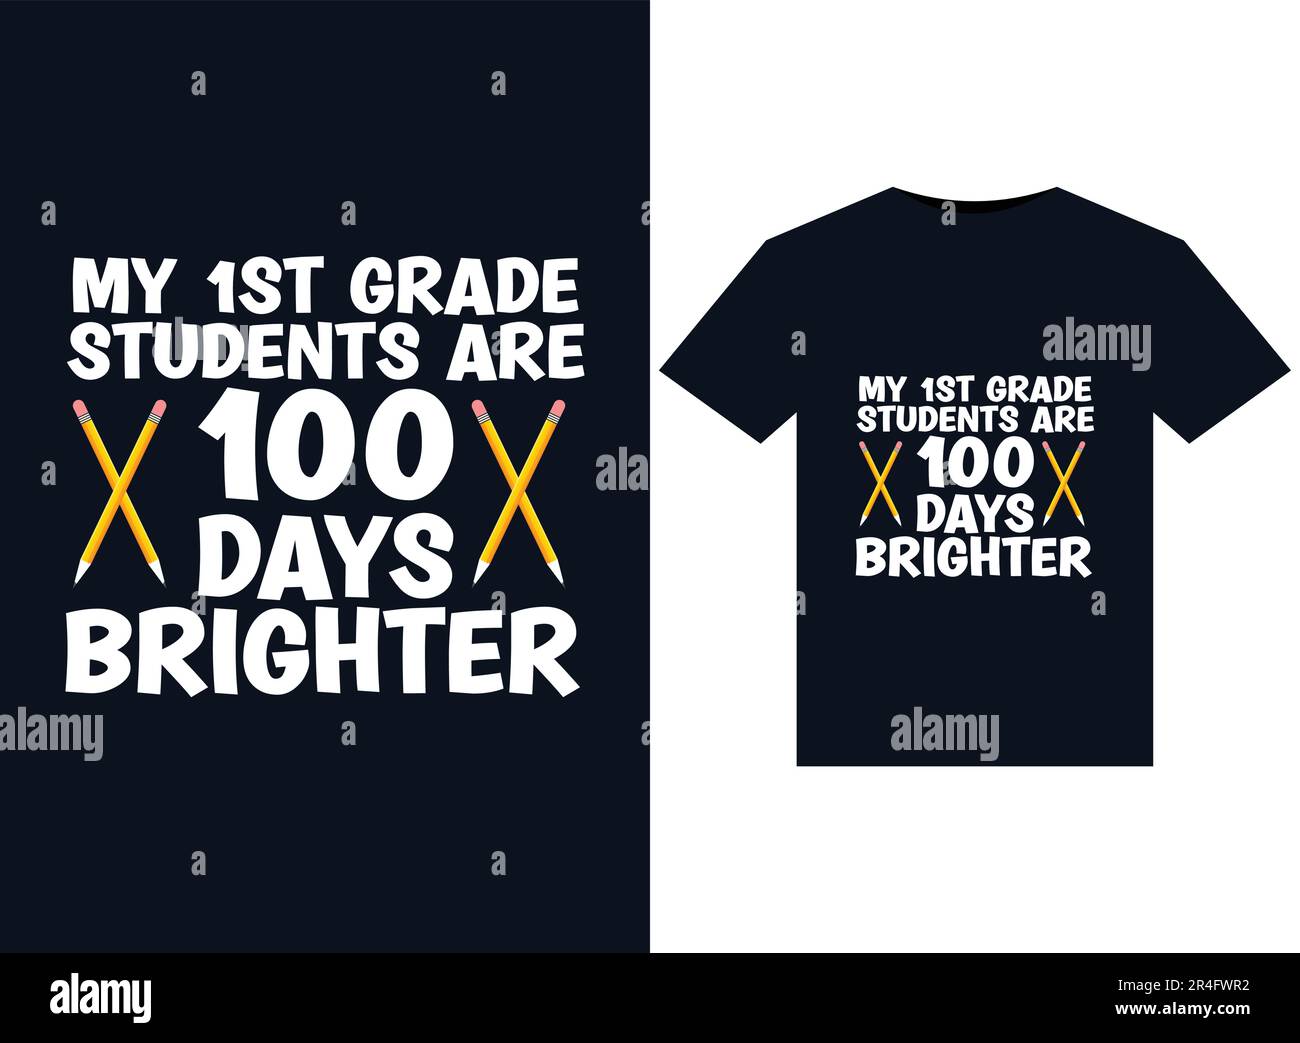 My 1st Grade students are 100 days brighter illustrations for print-ready T-Shirts design. Stock Vector